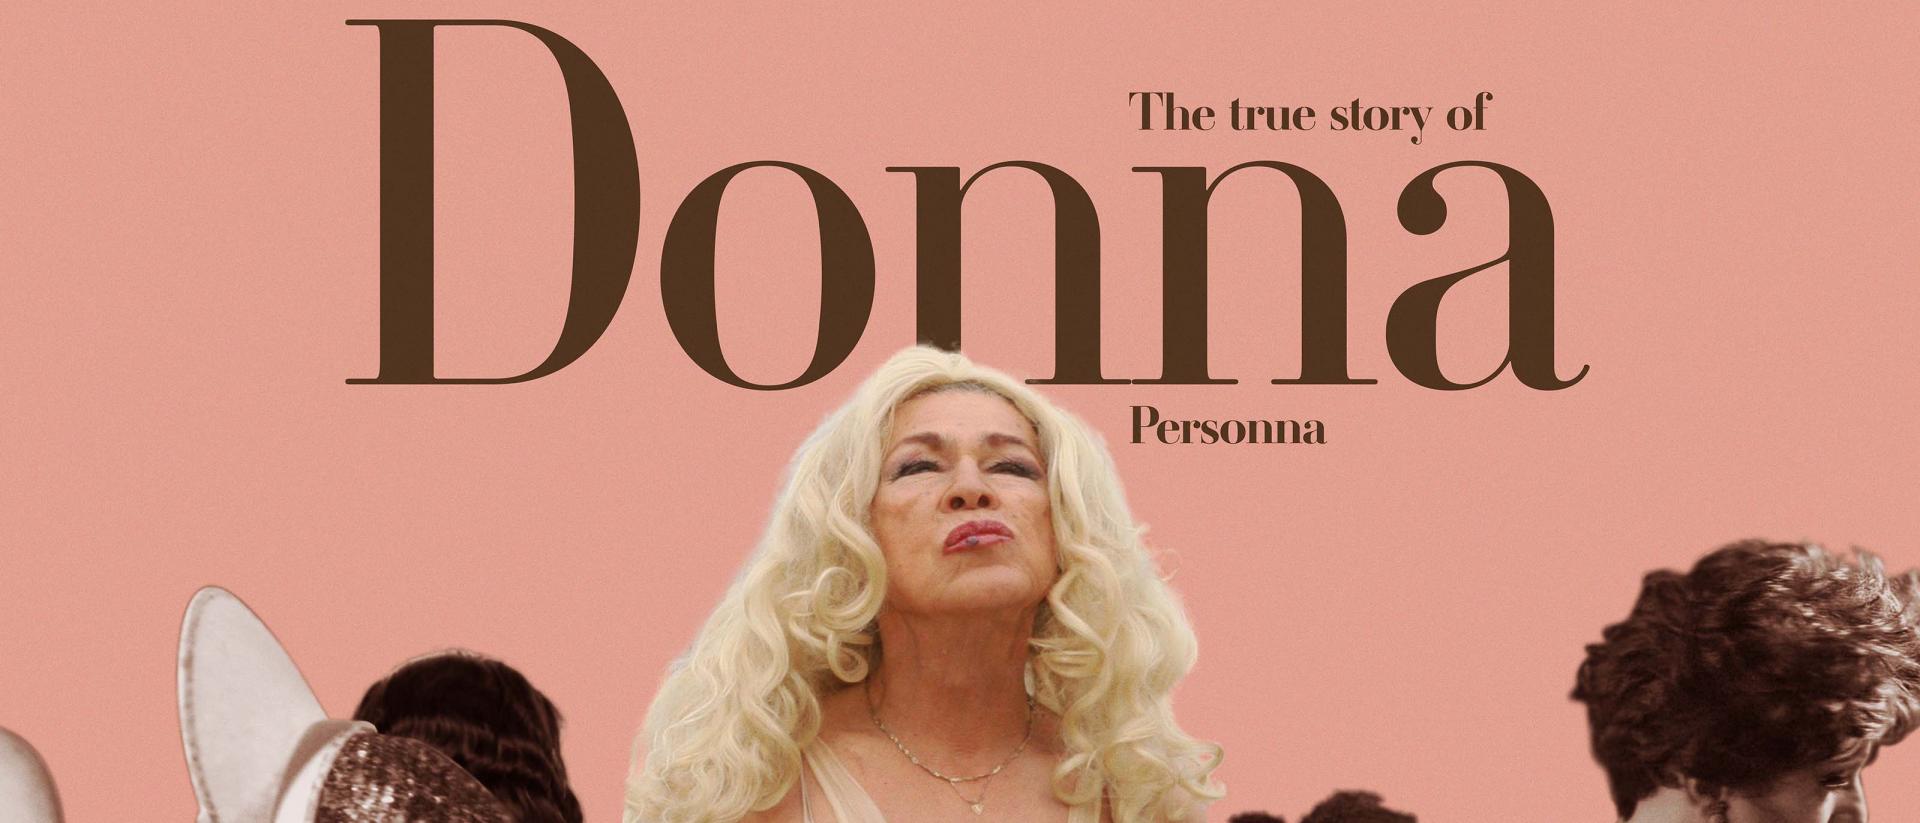 poster for Donna featuring a photo of Donna Personna on a pick background and text reading: The true story of Donna Personna.